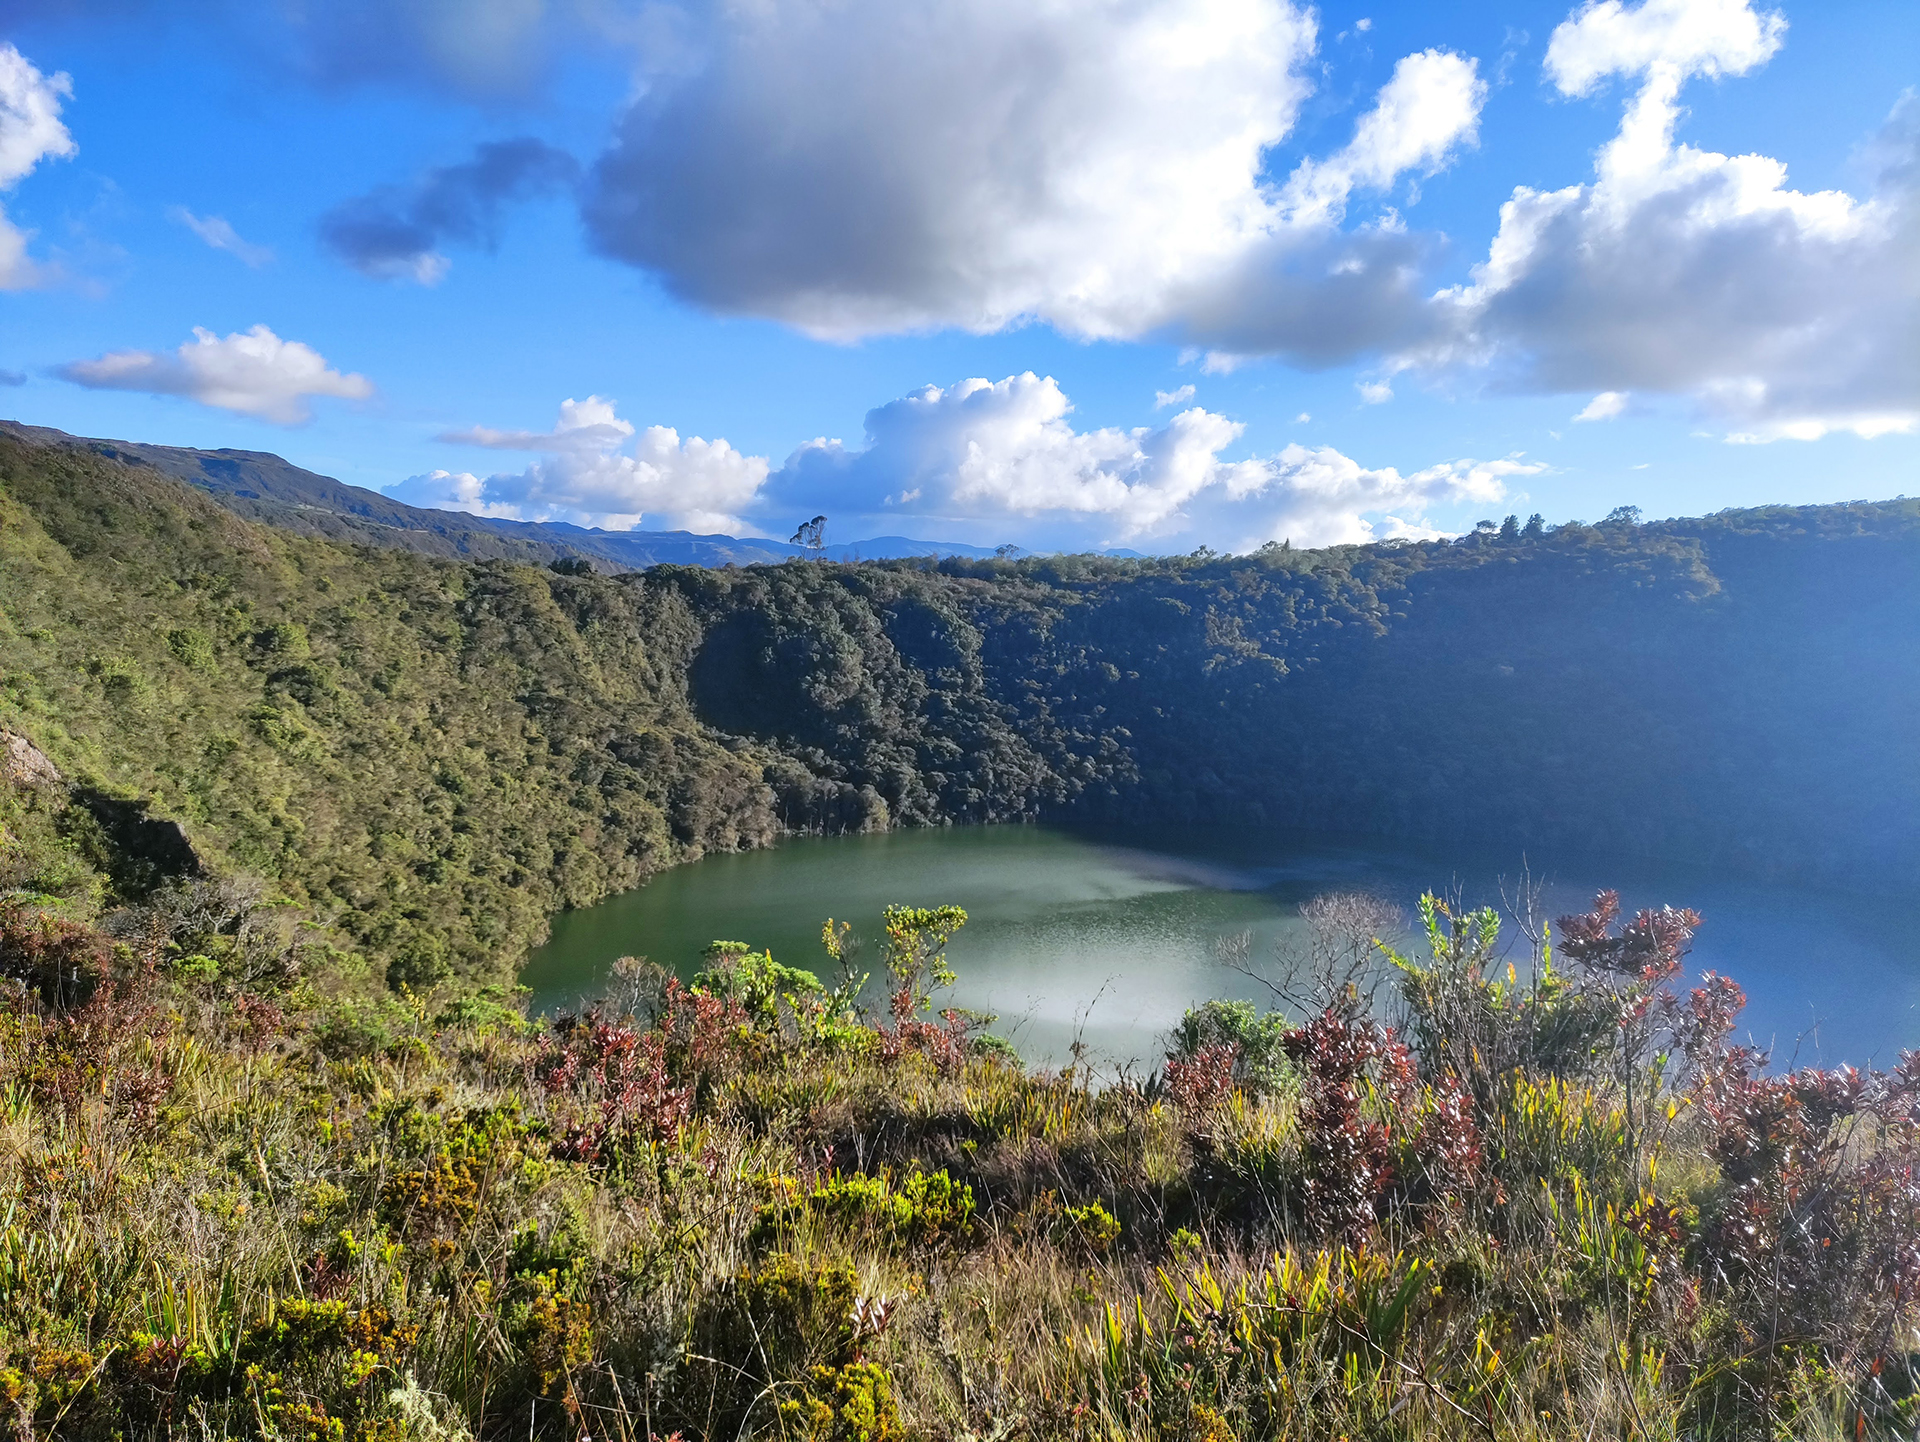 A crater lake surrounded by dense green vegetation under a partly cloudy blue sky, the landscape features rugged terrain and lush plant life—one of the must-see sights on tours in Bogotá.